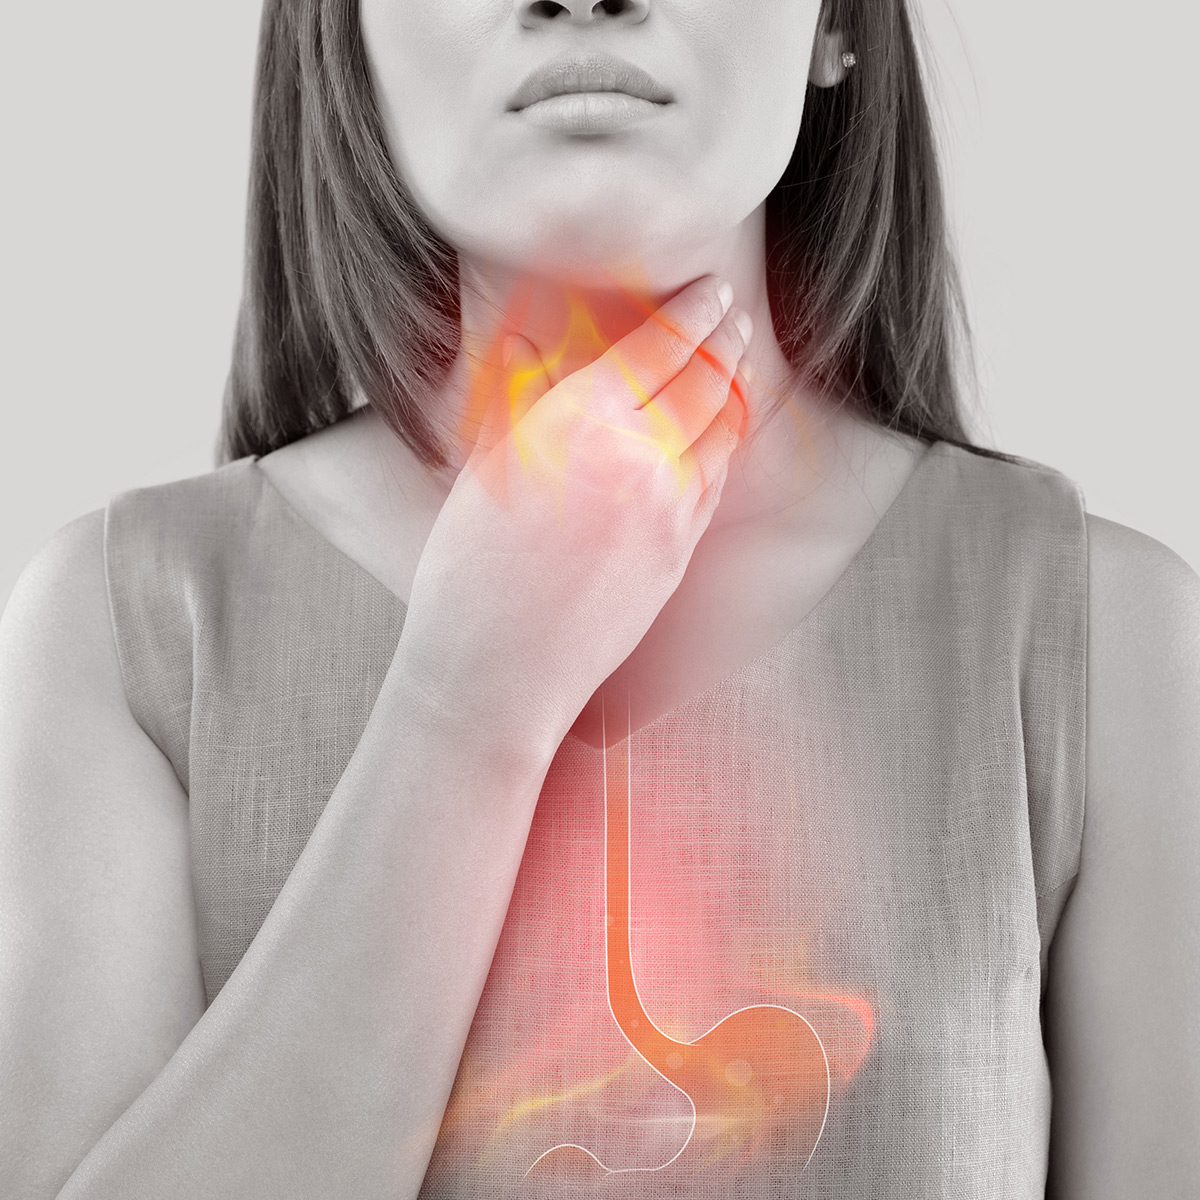 Read more about the article GASTROESOPHAGEAL REFLUX DISEASE (GERD) – Symptoms, Causes, Natural Home Remedies and Reflux Diet